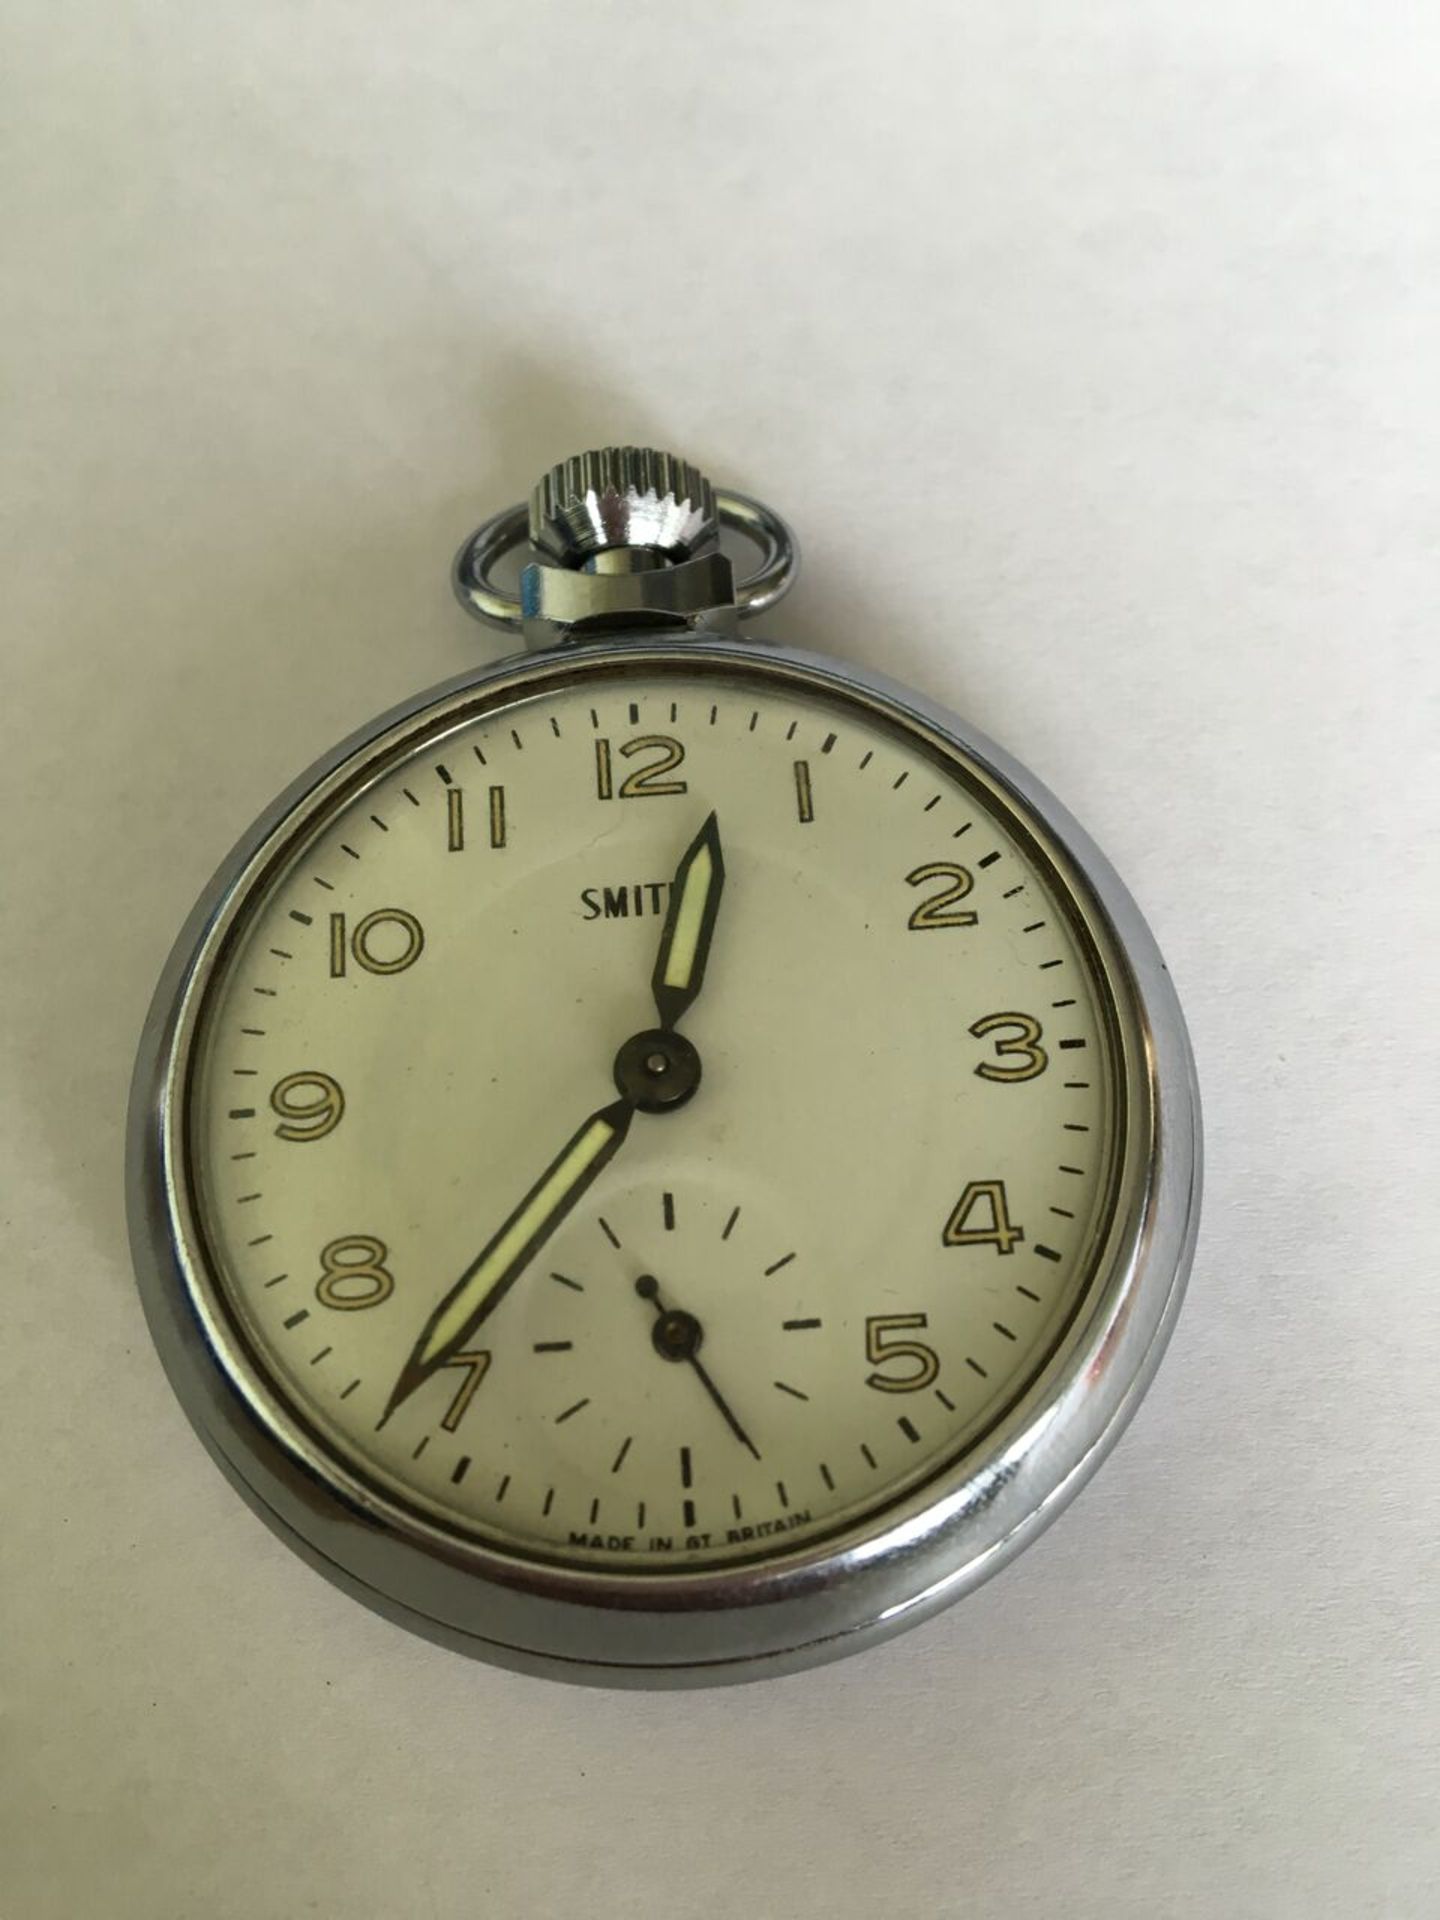 POCKET WATCH BY SMITHS IN CHROME CASE AND IN WORKING ORDER. FREE UK DELIVERY. NO VAT.